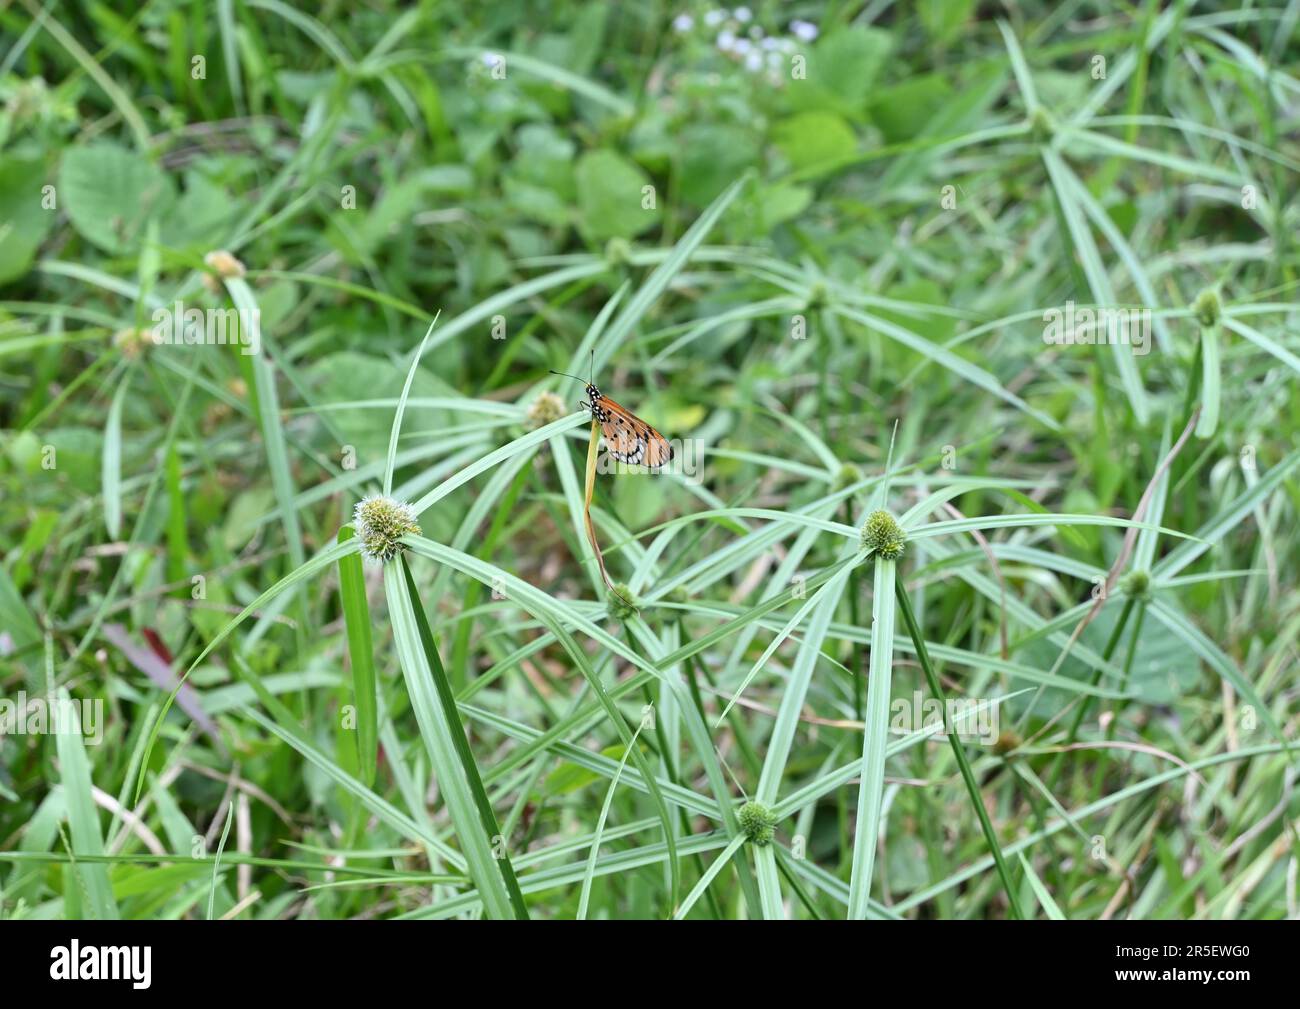 Wallpaper view of the flowering Nut grasses (Cyperus Rotundus) with an orange color Tawny coster butterfly (Acraea Terpsicore) perched on top of the l Stock Photo